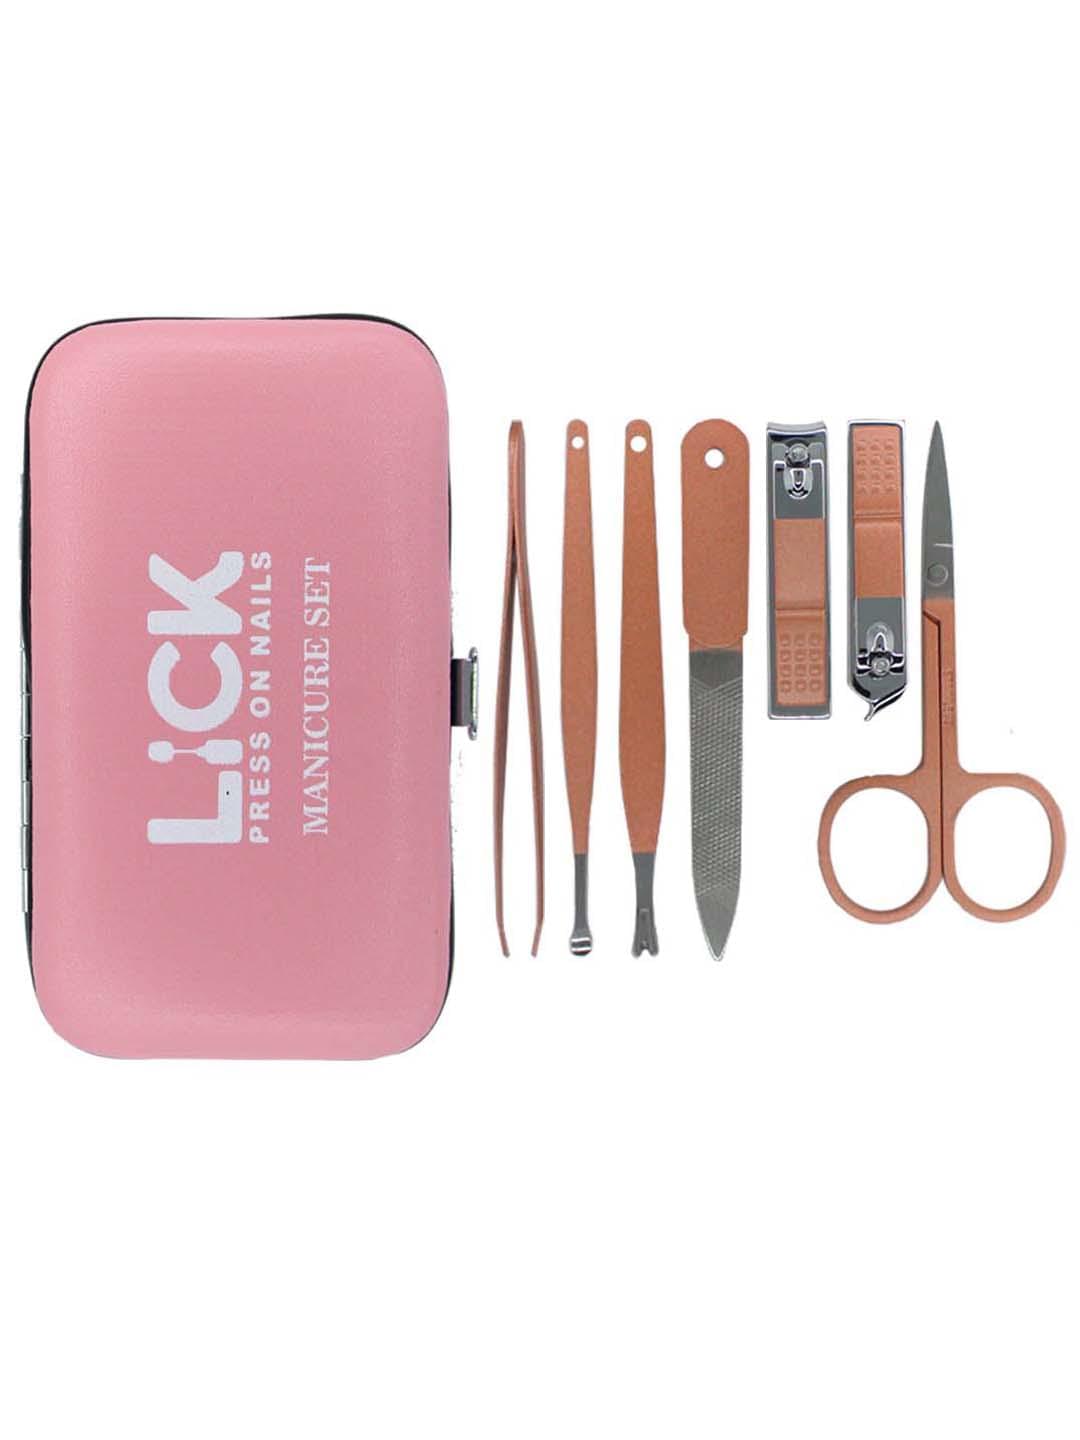 Lick Mini Manicure Kit, Pedicure Tools For Feet, Nail Clipper, Manicure Pedicure Kit For Women And Men, 7 Pieces, Rose Gold